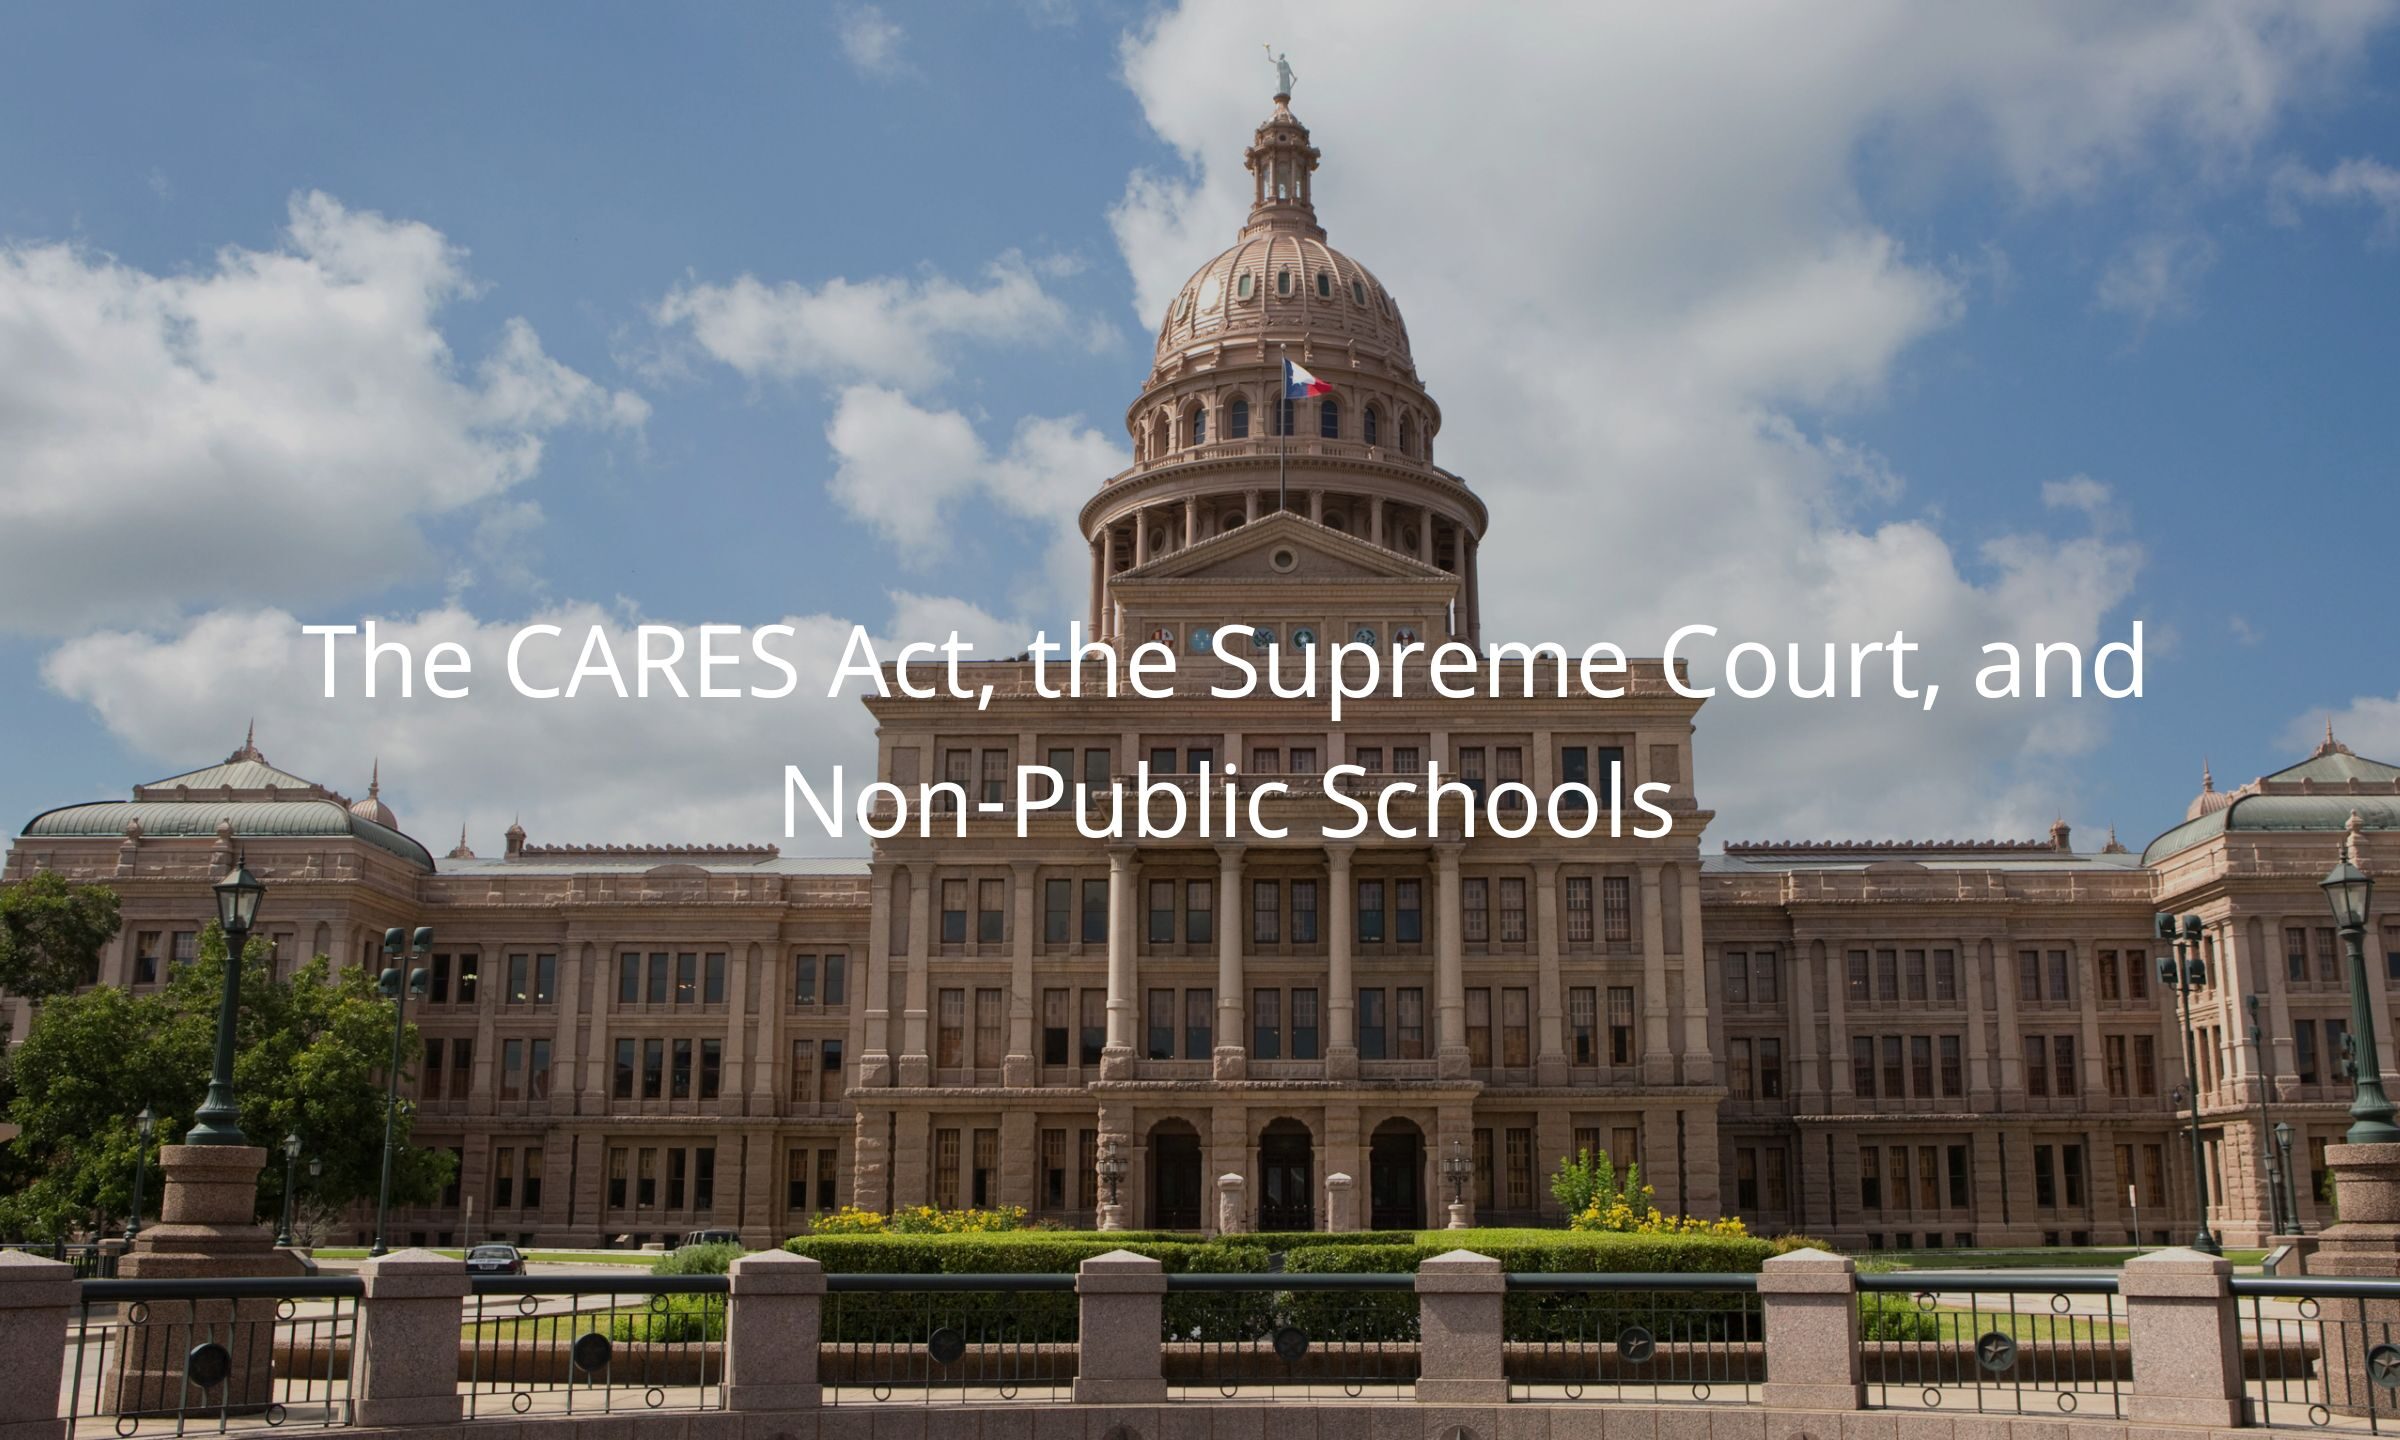 Using CARES Act Funding for Private School Reopening